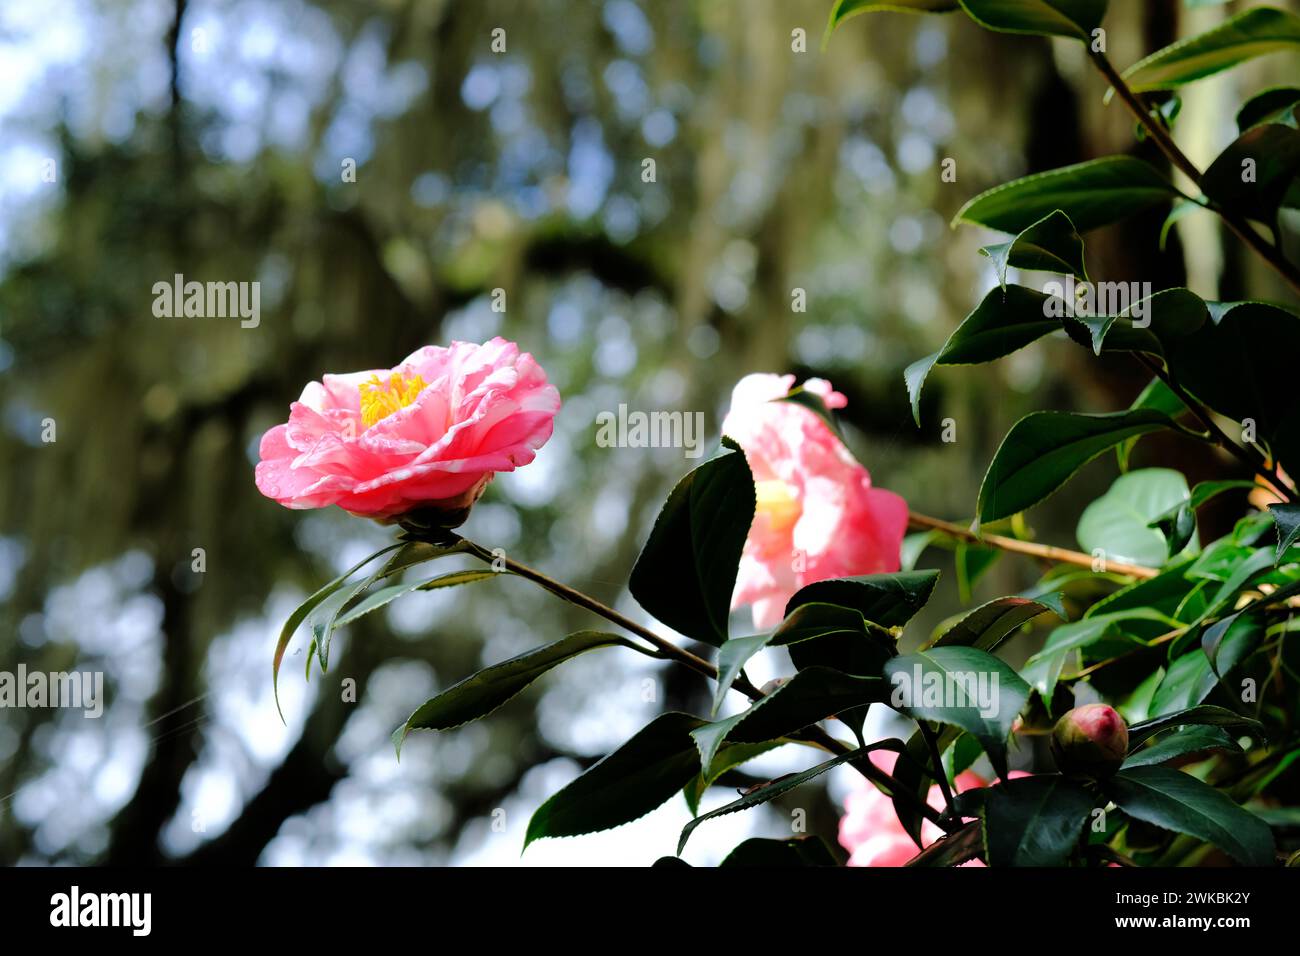 Camellia japonica Faith Variegated variety; pink, rose and white flower petals and yellow stamen surrounded by lush green leaves. Stock Photo